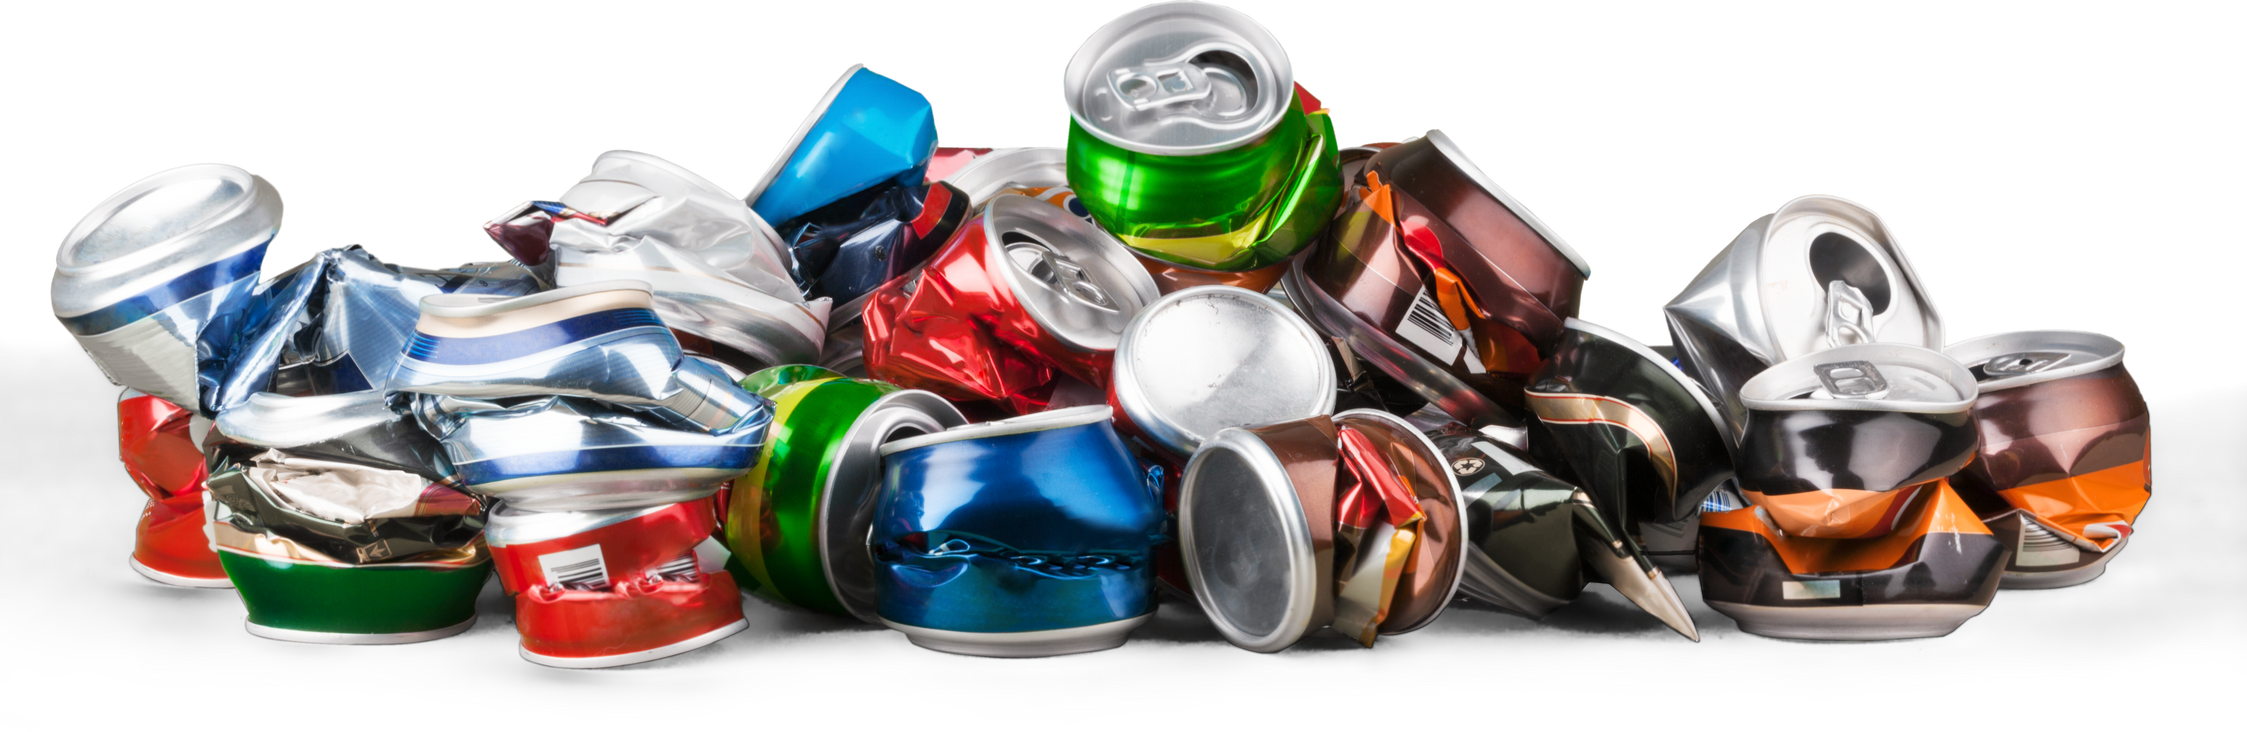 Crushed Aluminum Cans 